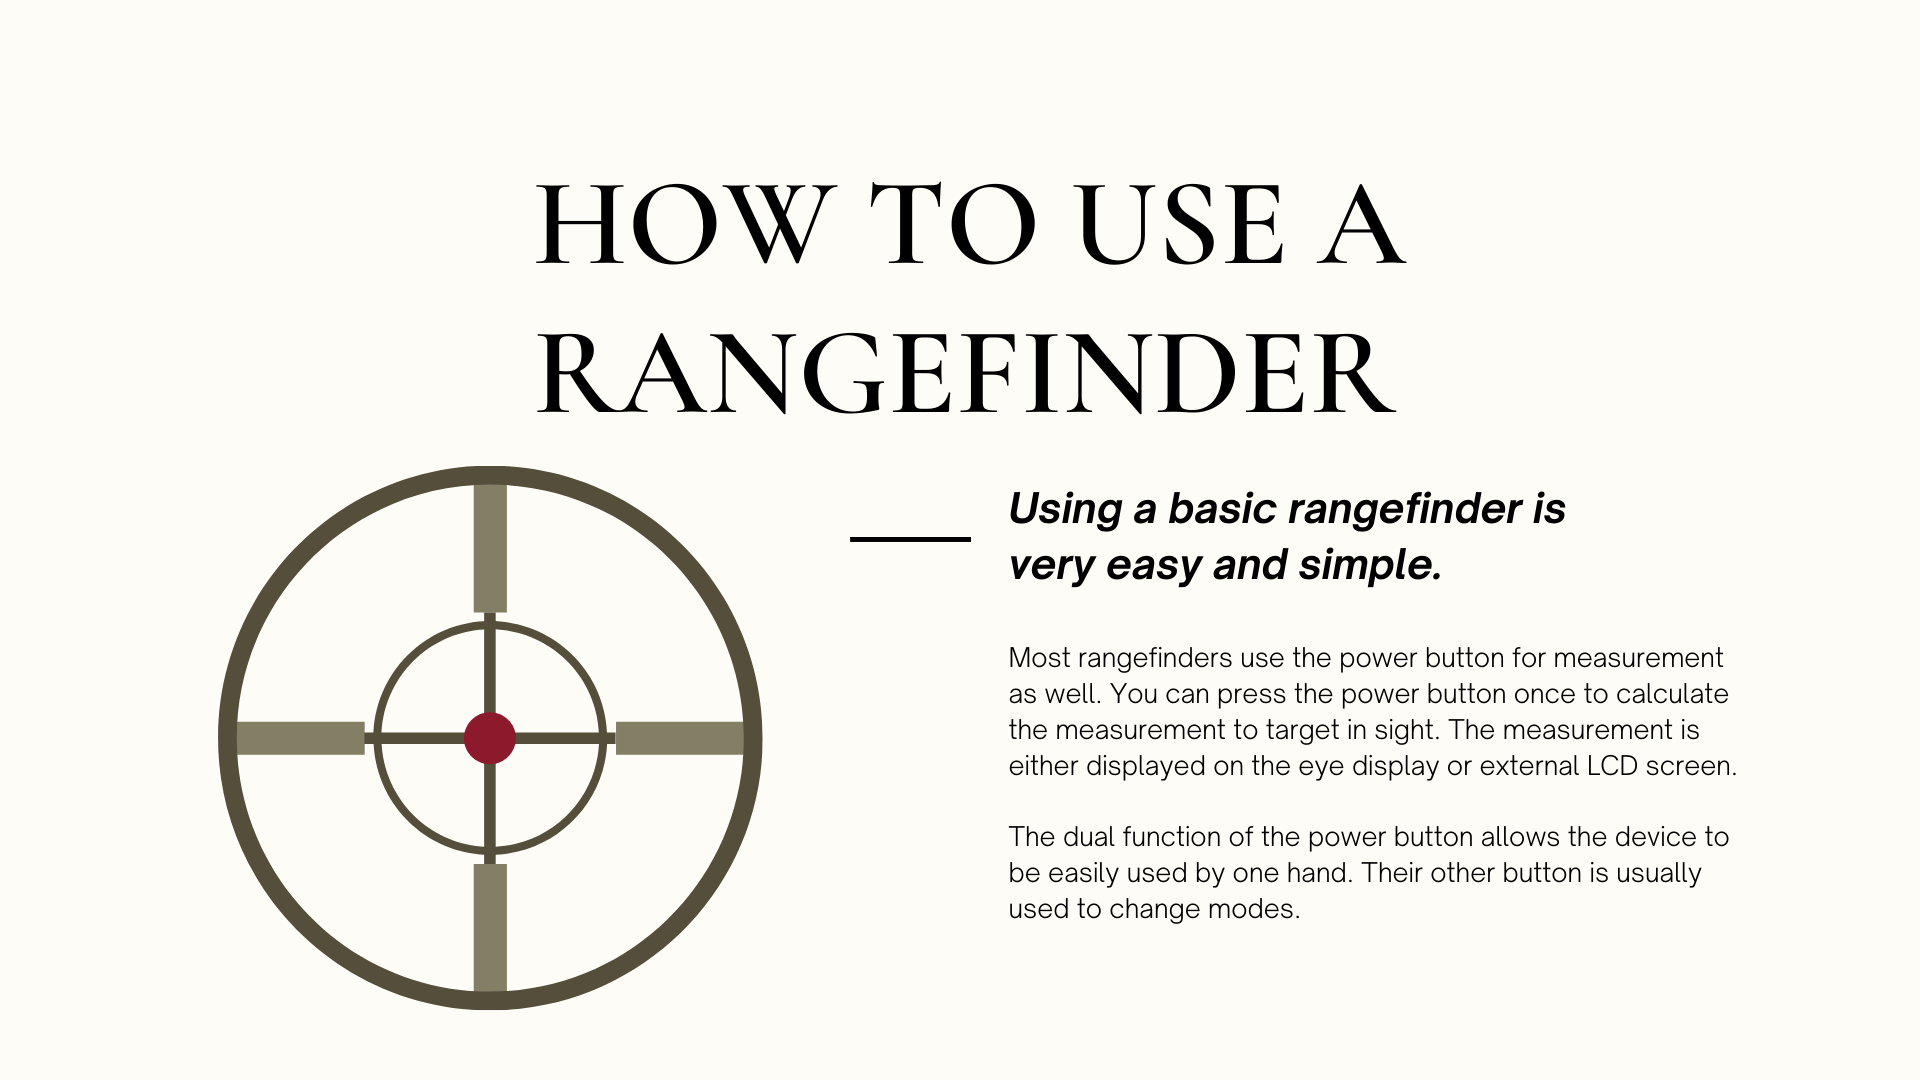 How to Use a Rangefinder